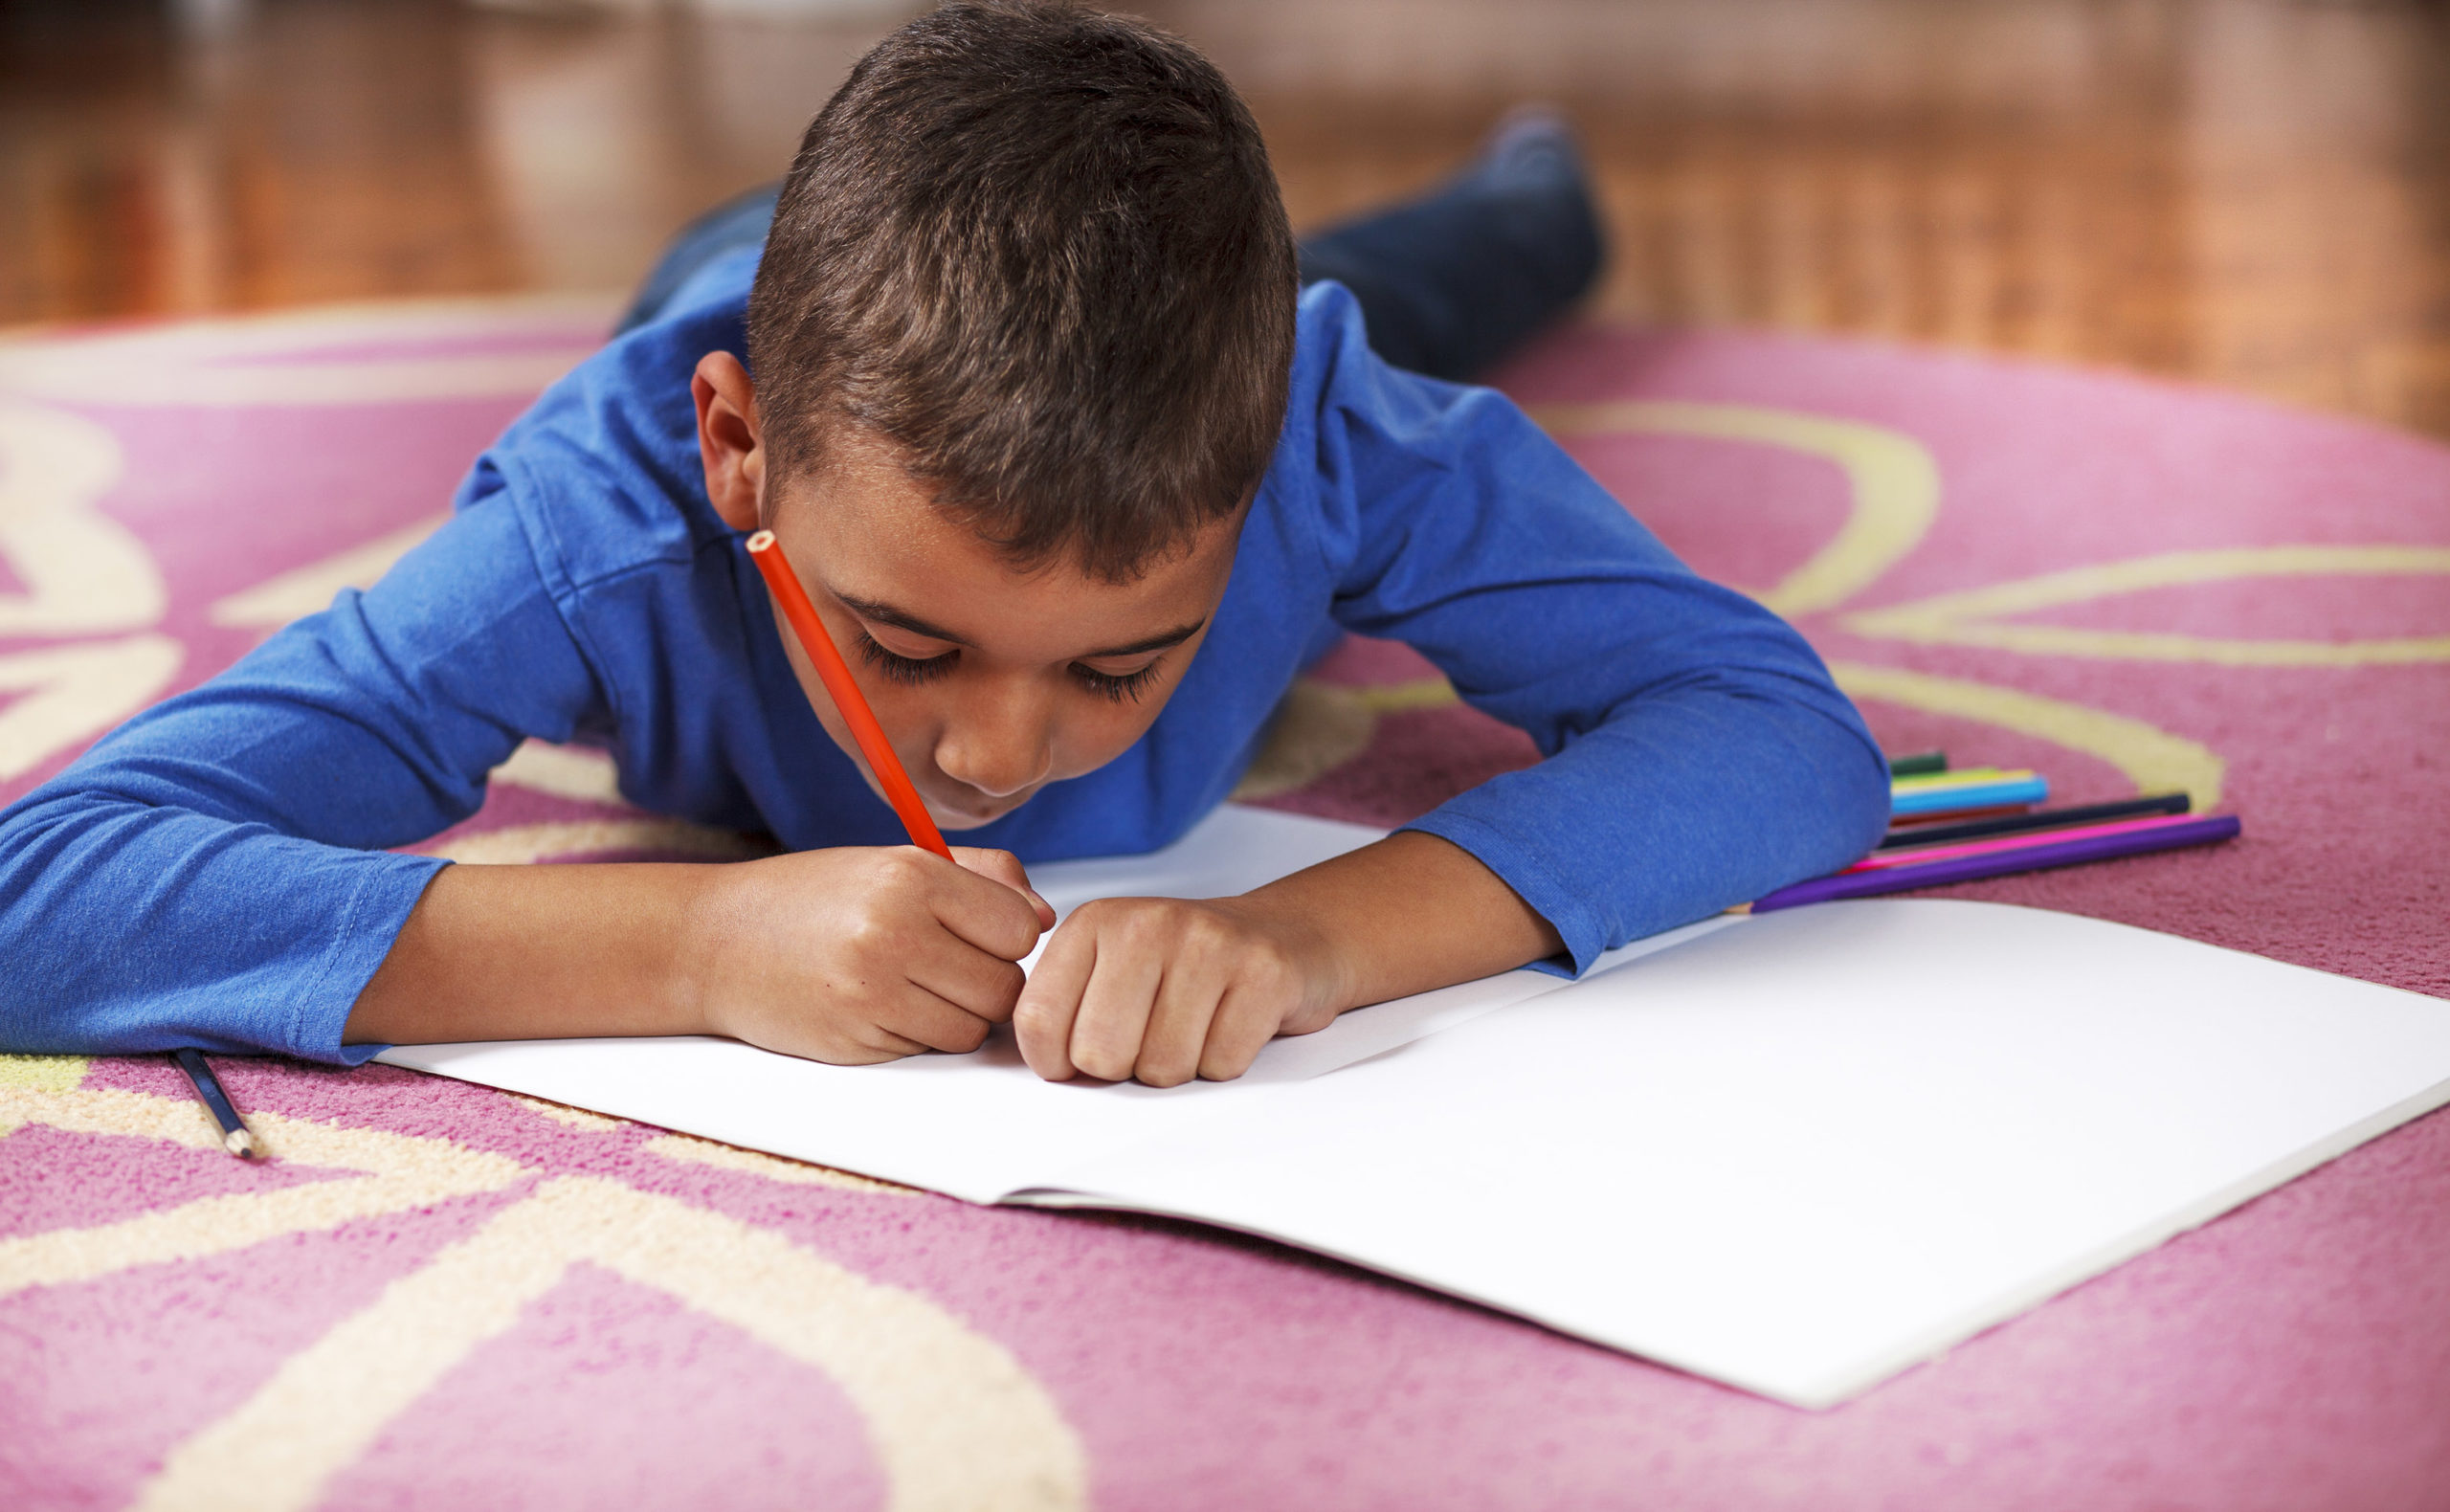 boy drawing on paper with crayon.